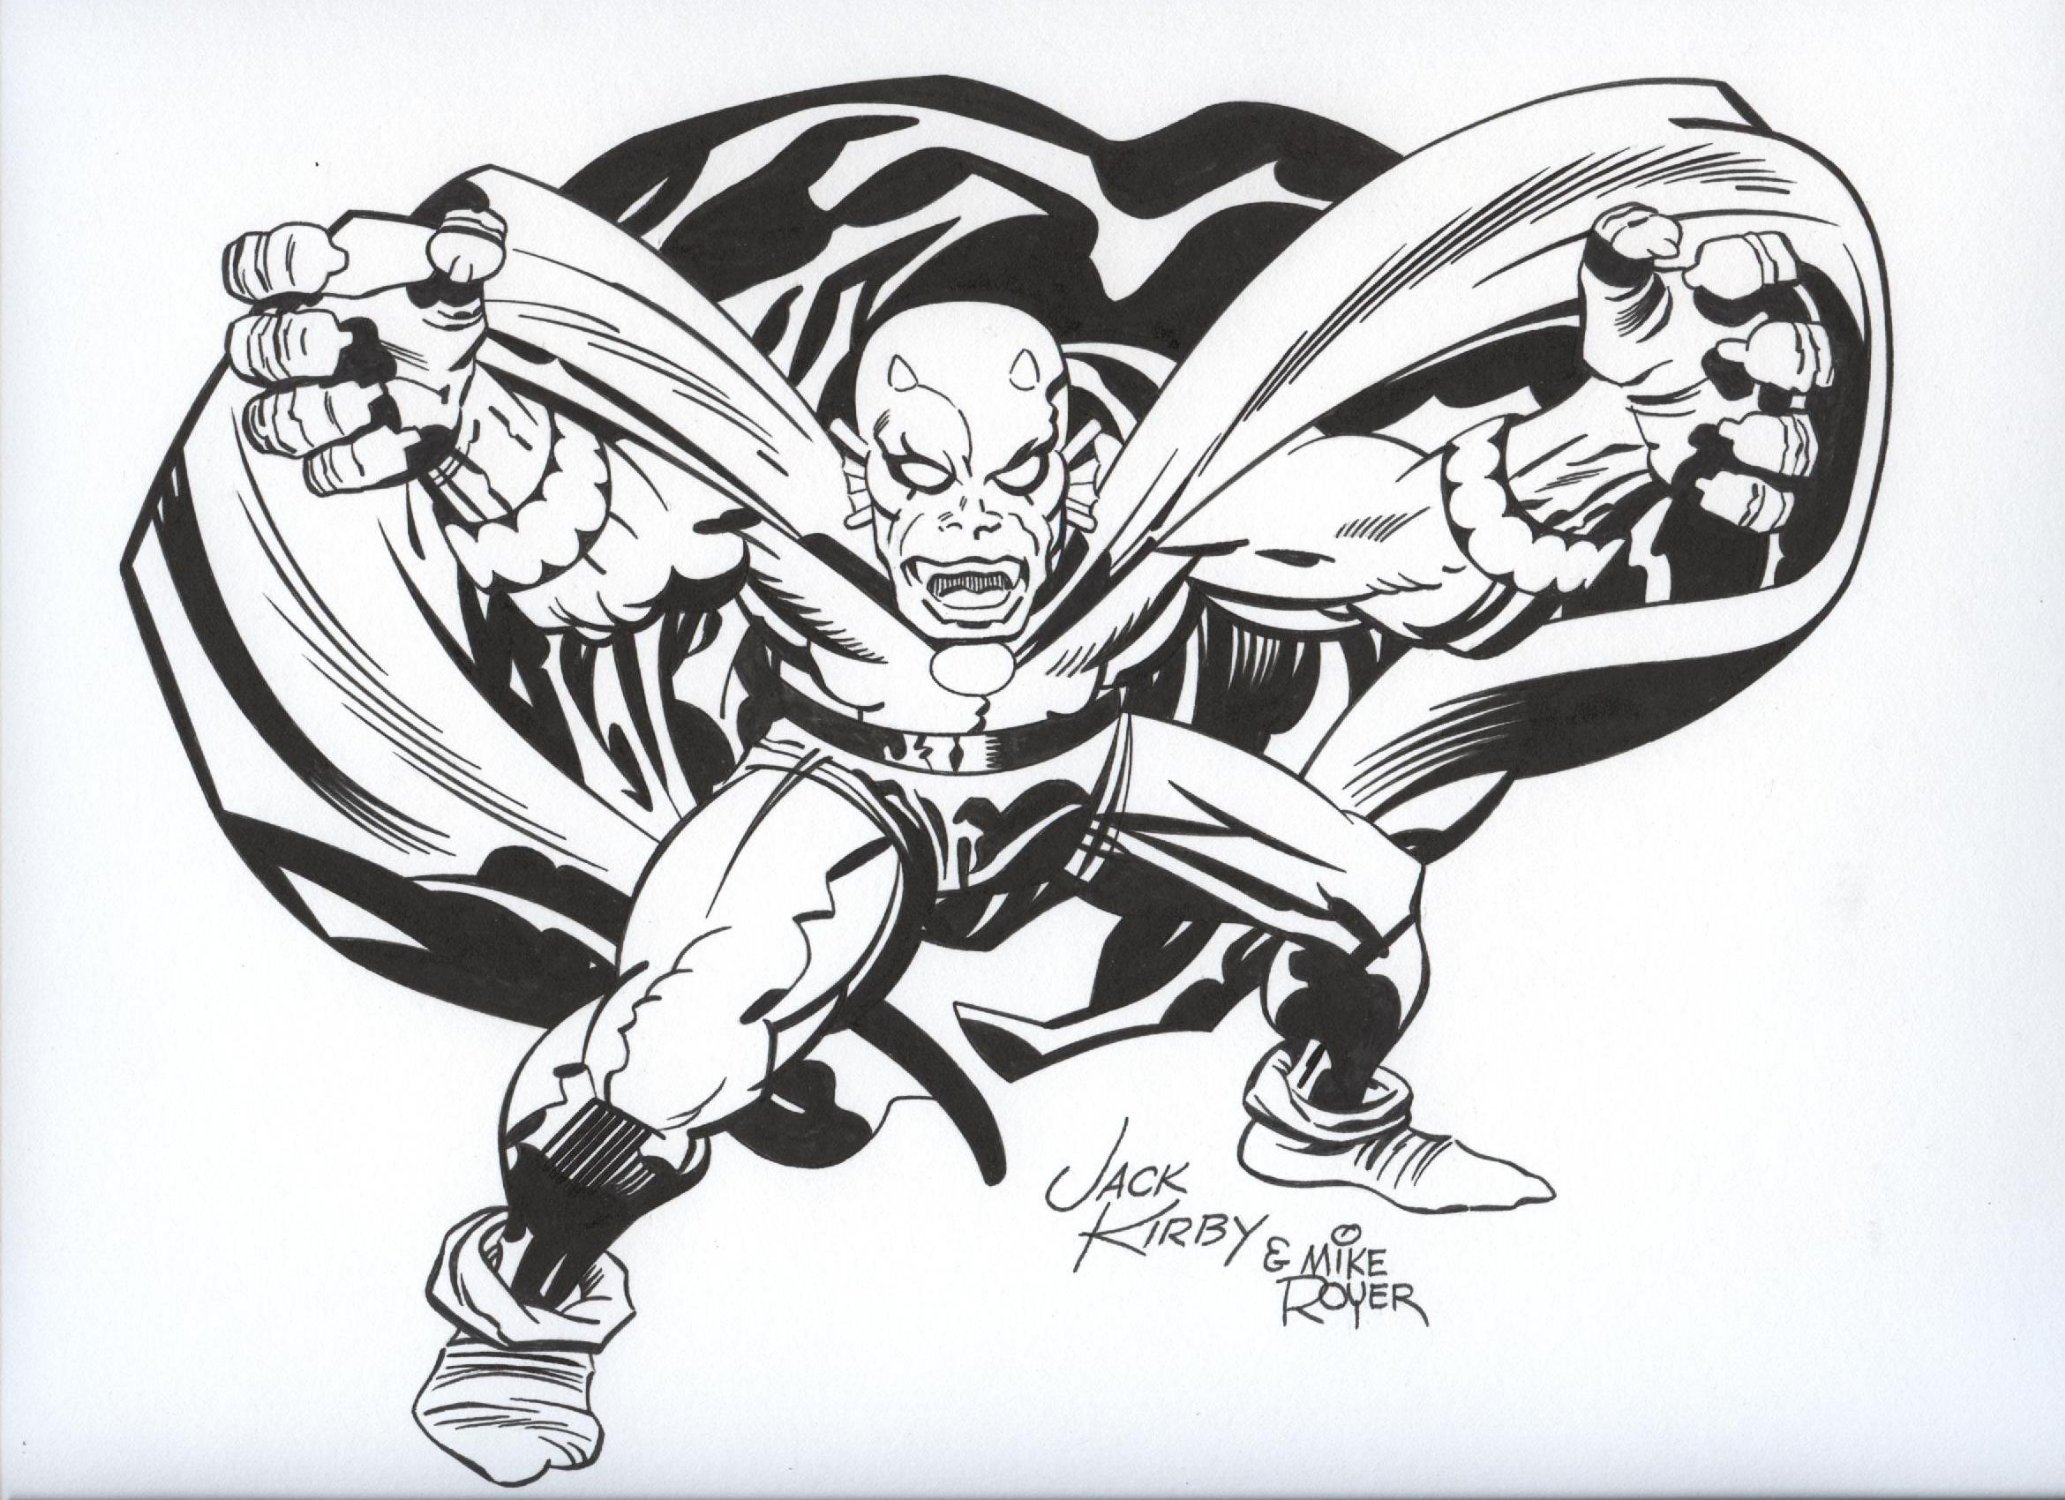 ROYER, MIKE / based on JACK KIRBY pencils - Demon leaps, in Stephen  Donnelly's ROYER, MIKE - DC & Marvel characters art with Jack Kirby Comic  Art Gallery Room